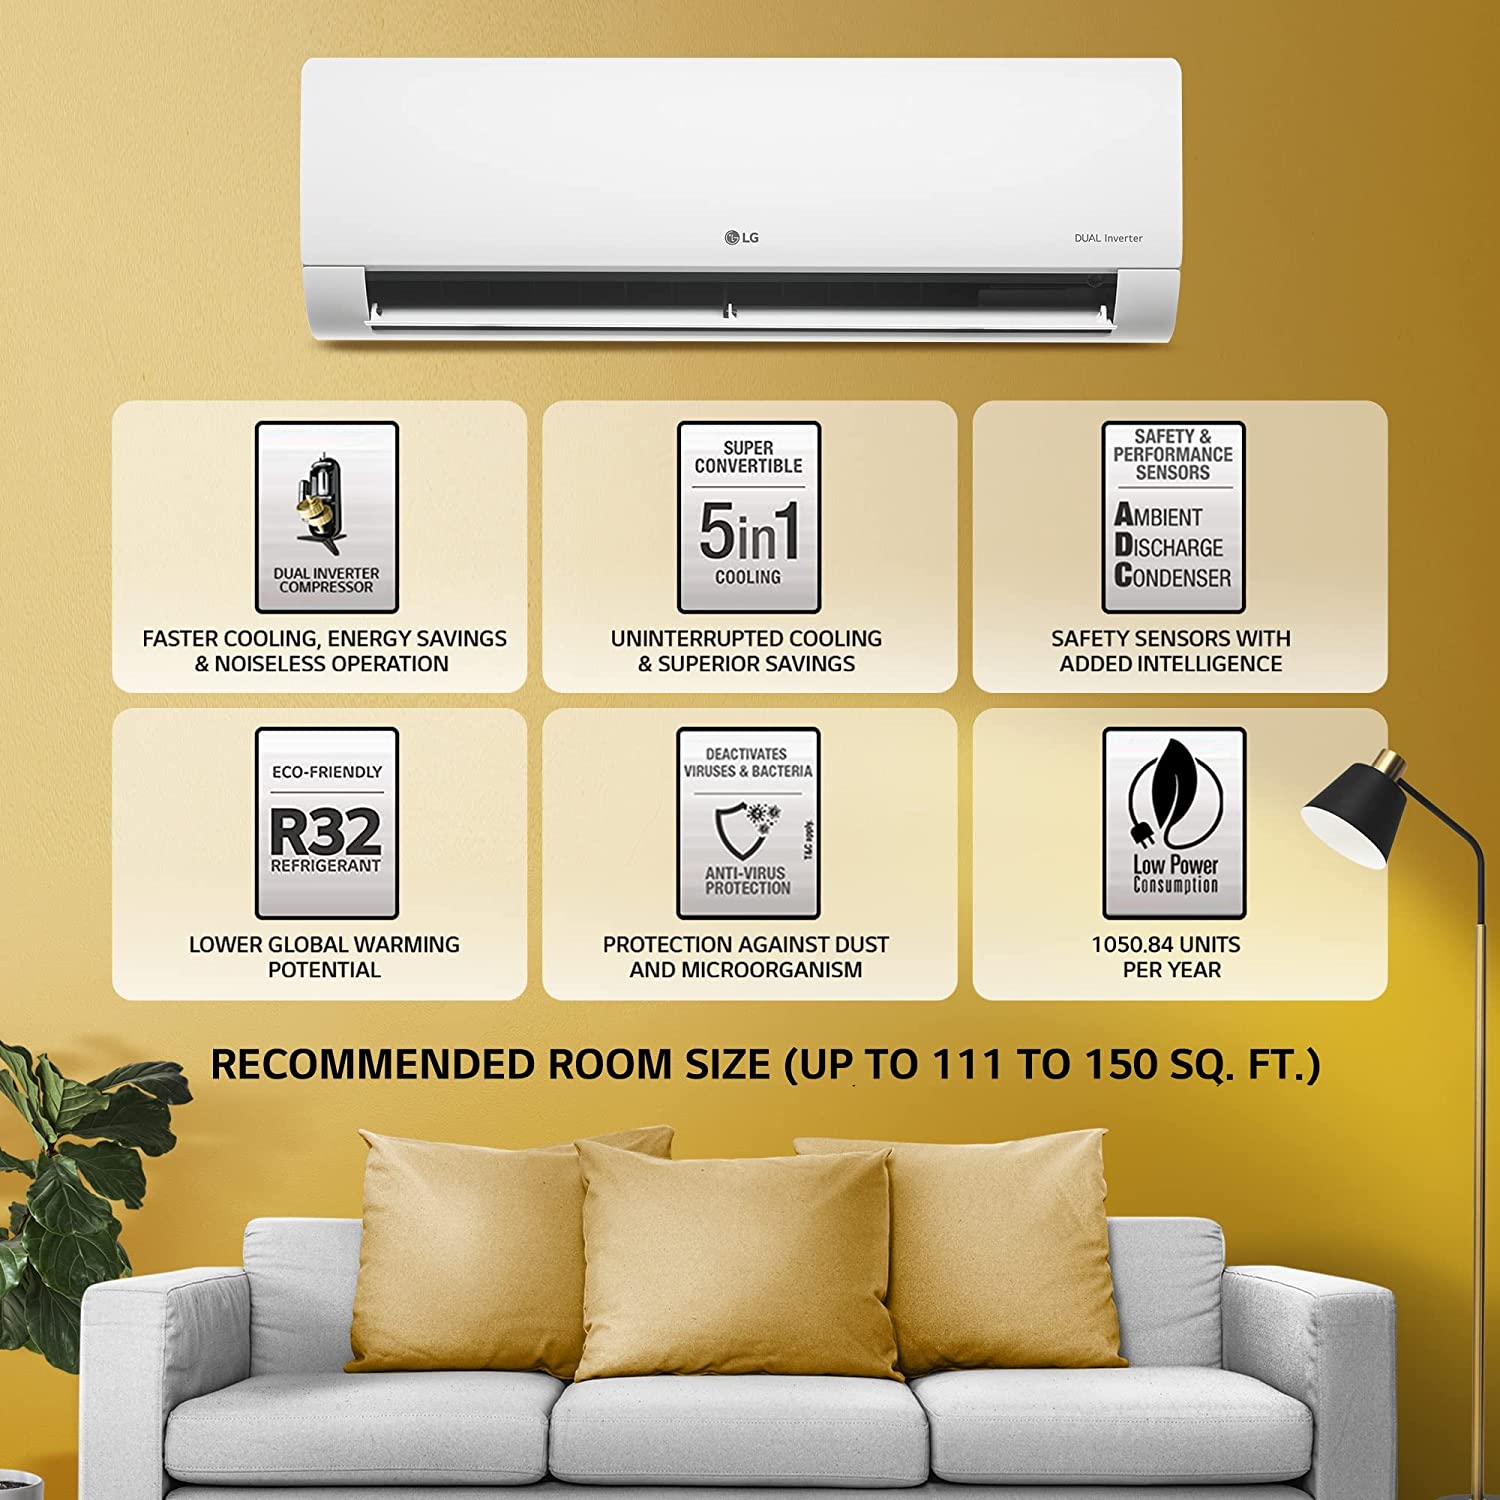 LG 1.5 Ton 3 Star DUAL Inverter Split AC (Copper, Super Convertible 5-in-1 Cooling, HD Filter with Anti-Virus Protection, 2022 Model, PS-Q19YNXE, White)